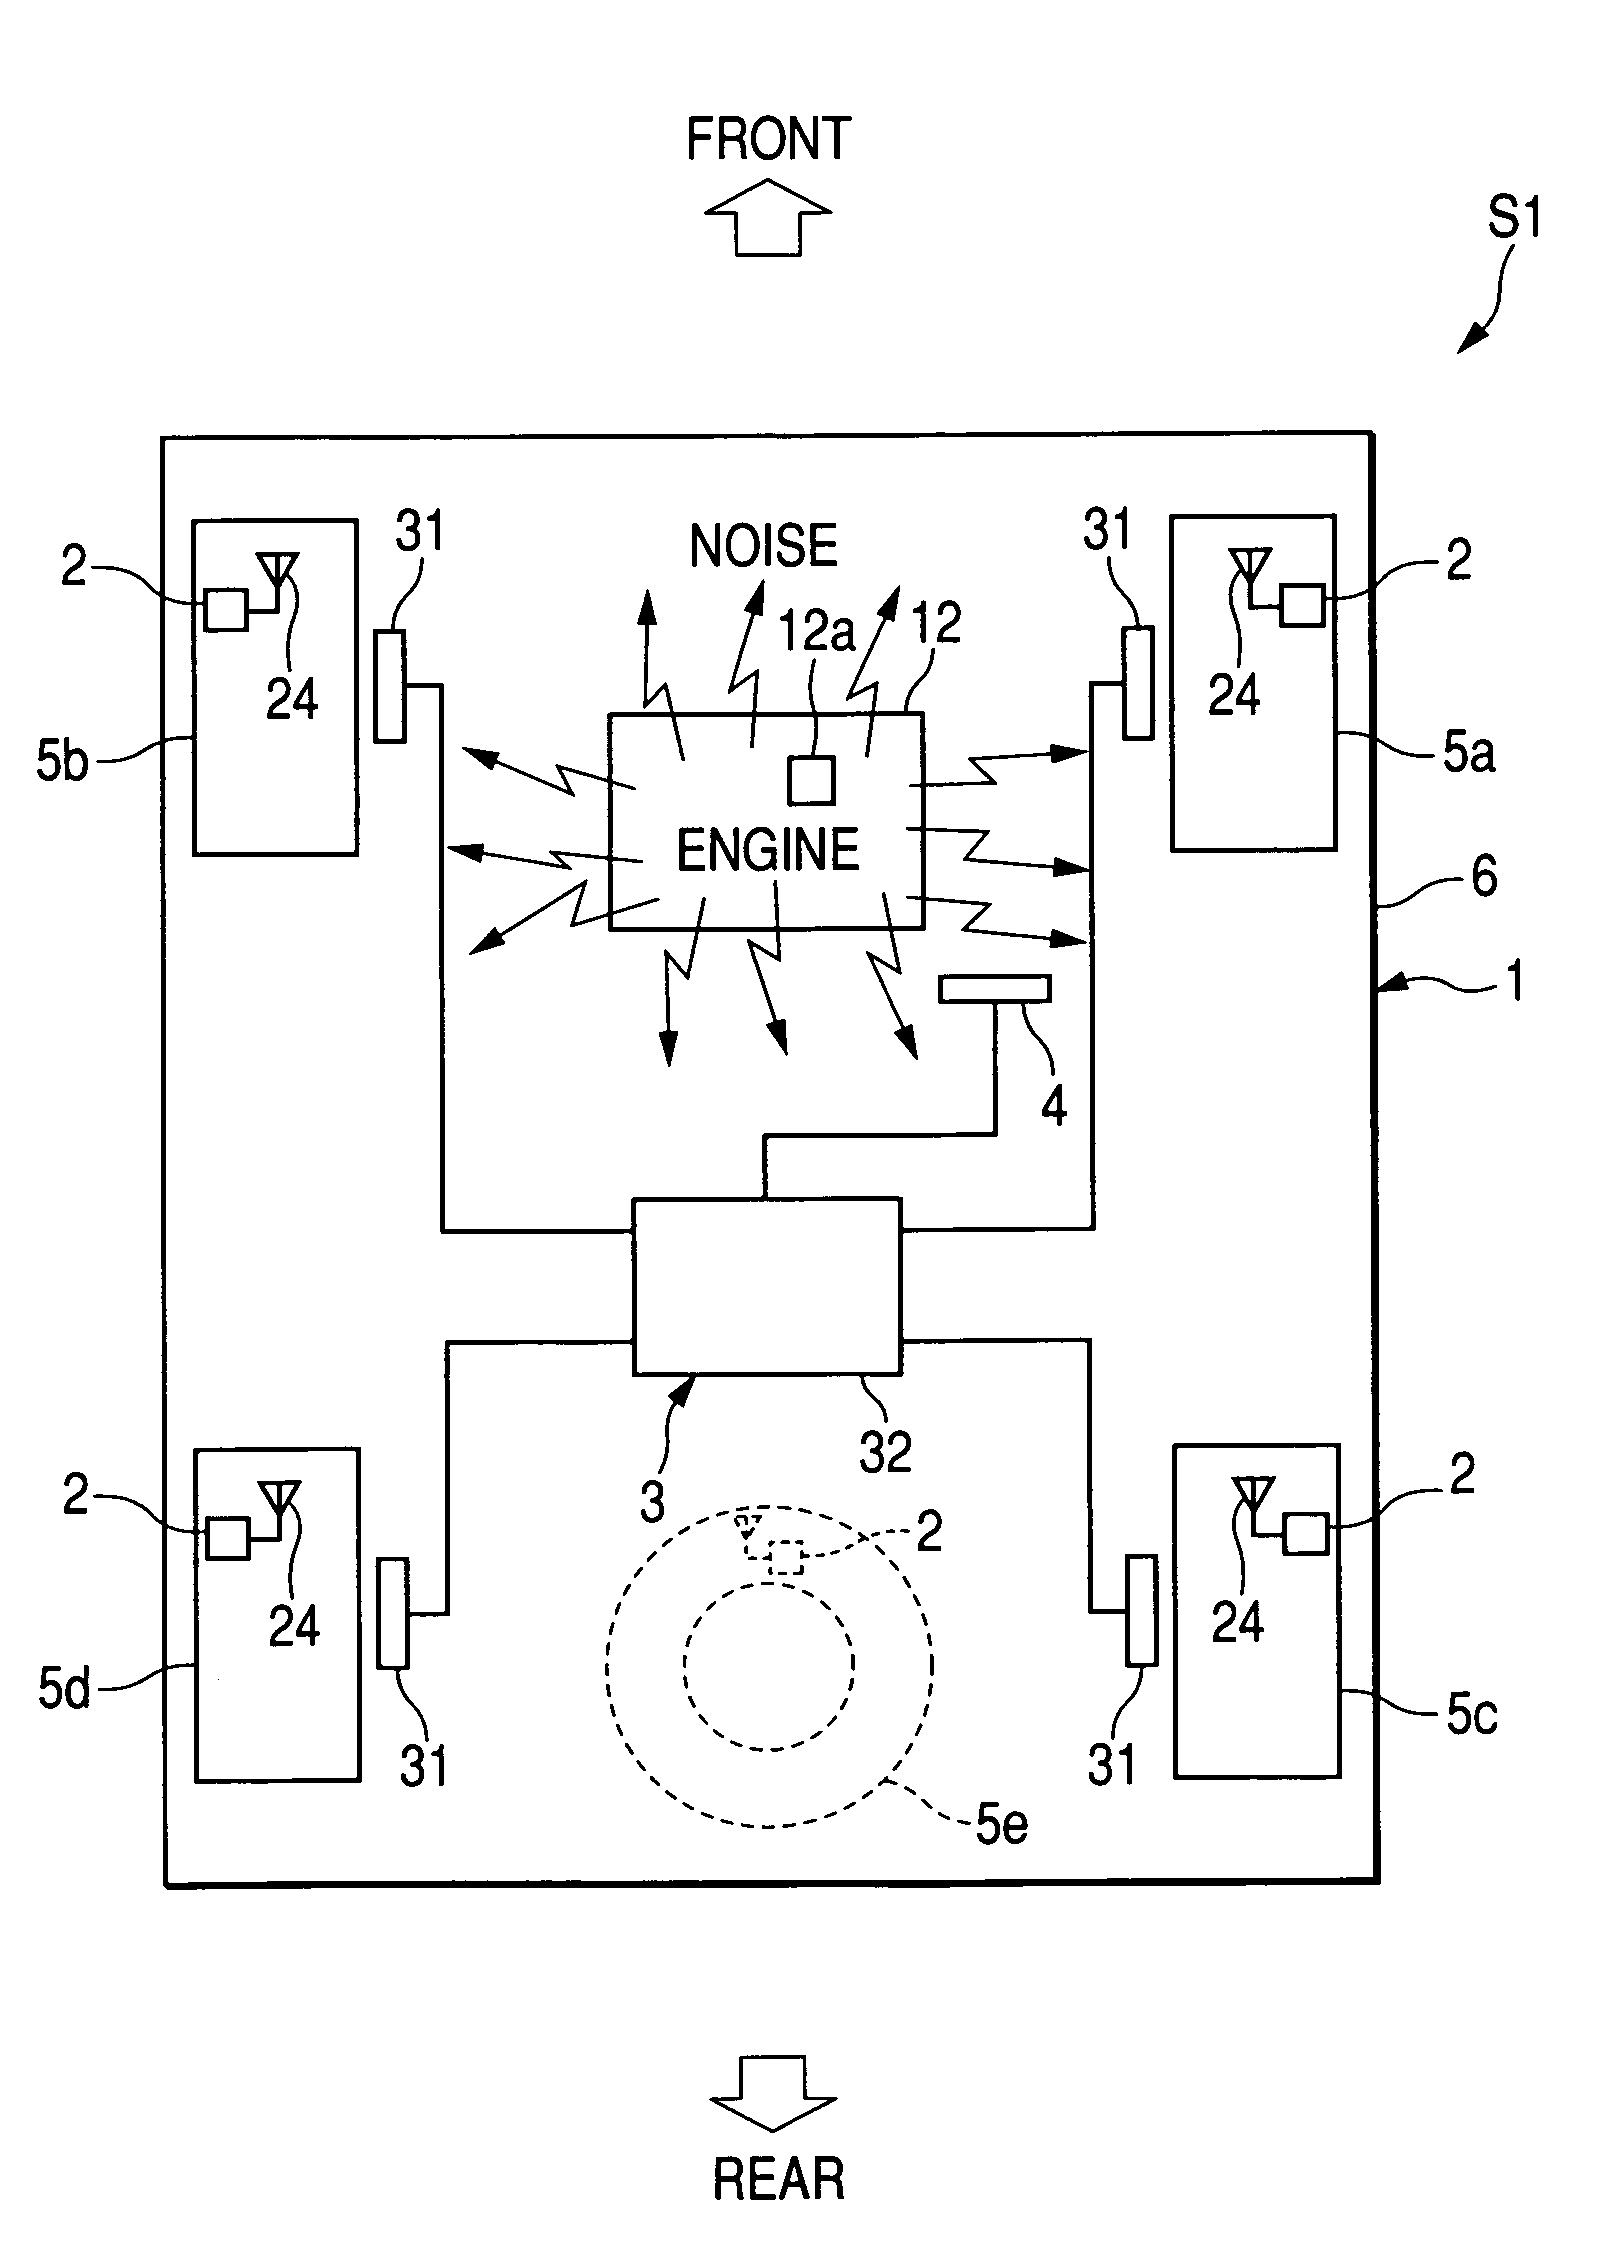 Tire inflation pressure sensing apparatus with function of detecting tire location